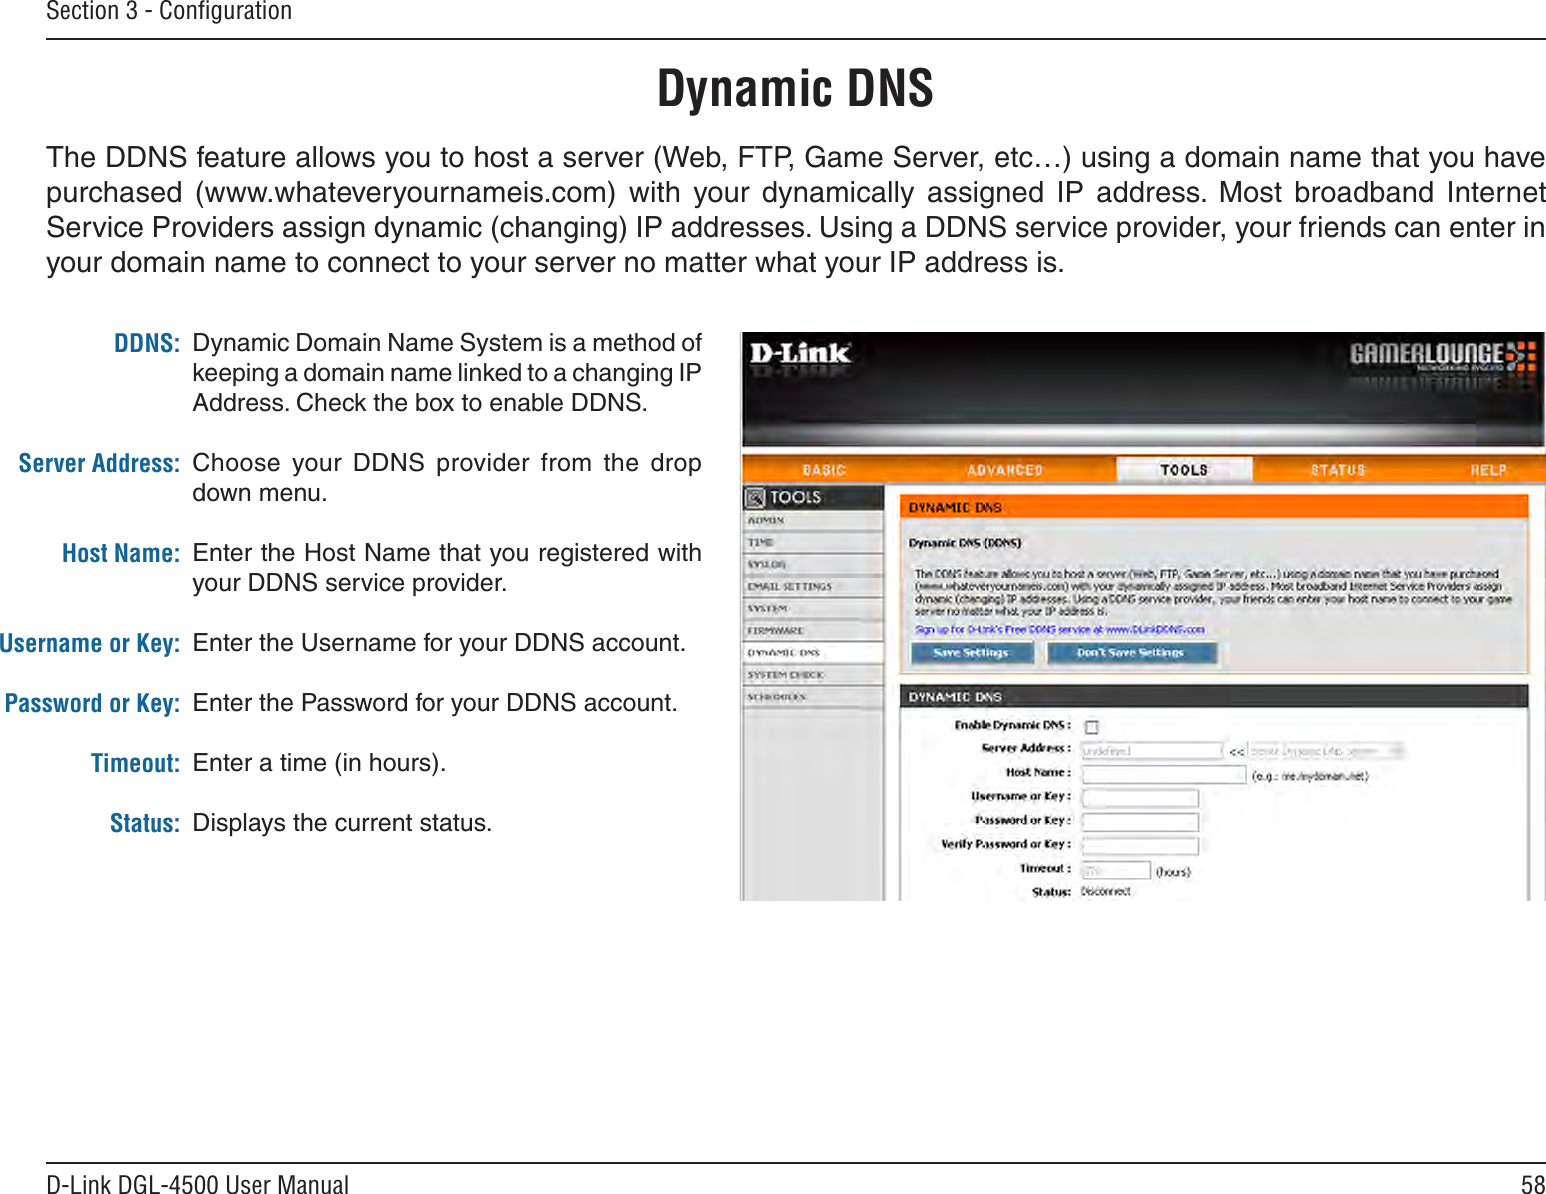 58D-Link DGL-4500 User ManualSection 3 - ConﬁgurationDynamic Domain Name System is a method of keeping a domain name linked to a changing IP Address. Check the box to enable DDNS.Choose  your DDNS  provider  from  the  drop down menu.Enter the Host Name that you registered with your DDNS service provider.Enter the Username for your DDNS account.Enter the Password for your DDNS account.Enter a time (in hours).Displays the current status.DDNS:Server Address:Host Name:Username or Key:Password or Key:Timeout:Status:Dynamic DNSThe DDNS feature allows you to host a server (Web, FTP, Game Server, etc…) using a domain name that you have purchased  (www.whateveryournameis.com)  with  your  dynamically  assigned  IP  address.  Most  broadband  Internet Service Providers assign dynamic (changing) IP addresses. Using a DDNS service provider, your friends can enter in your domain name to connect to your server no matter what your IP address is.